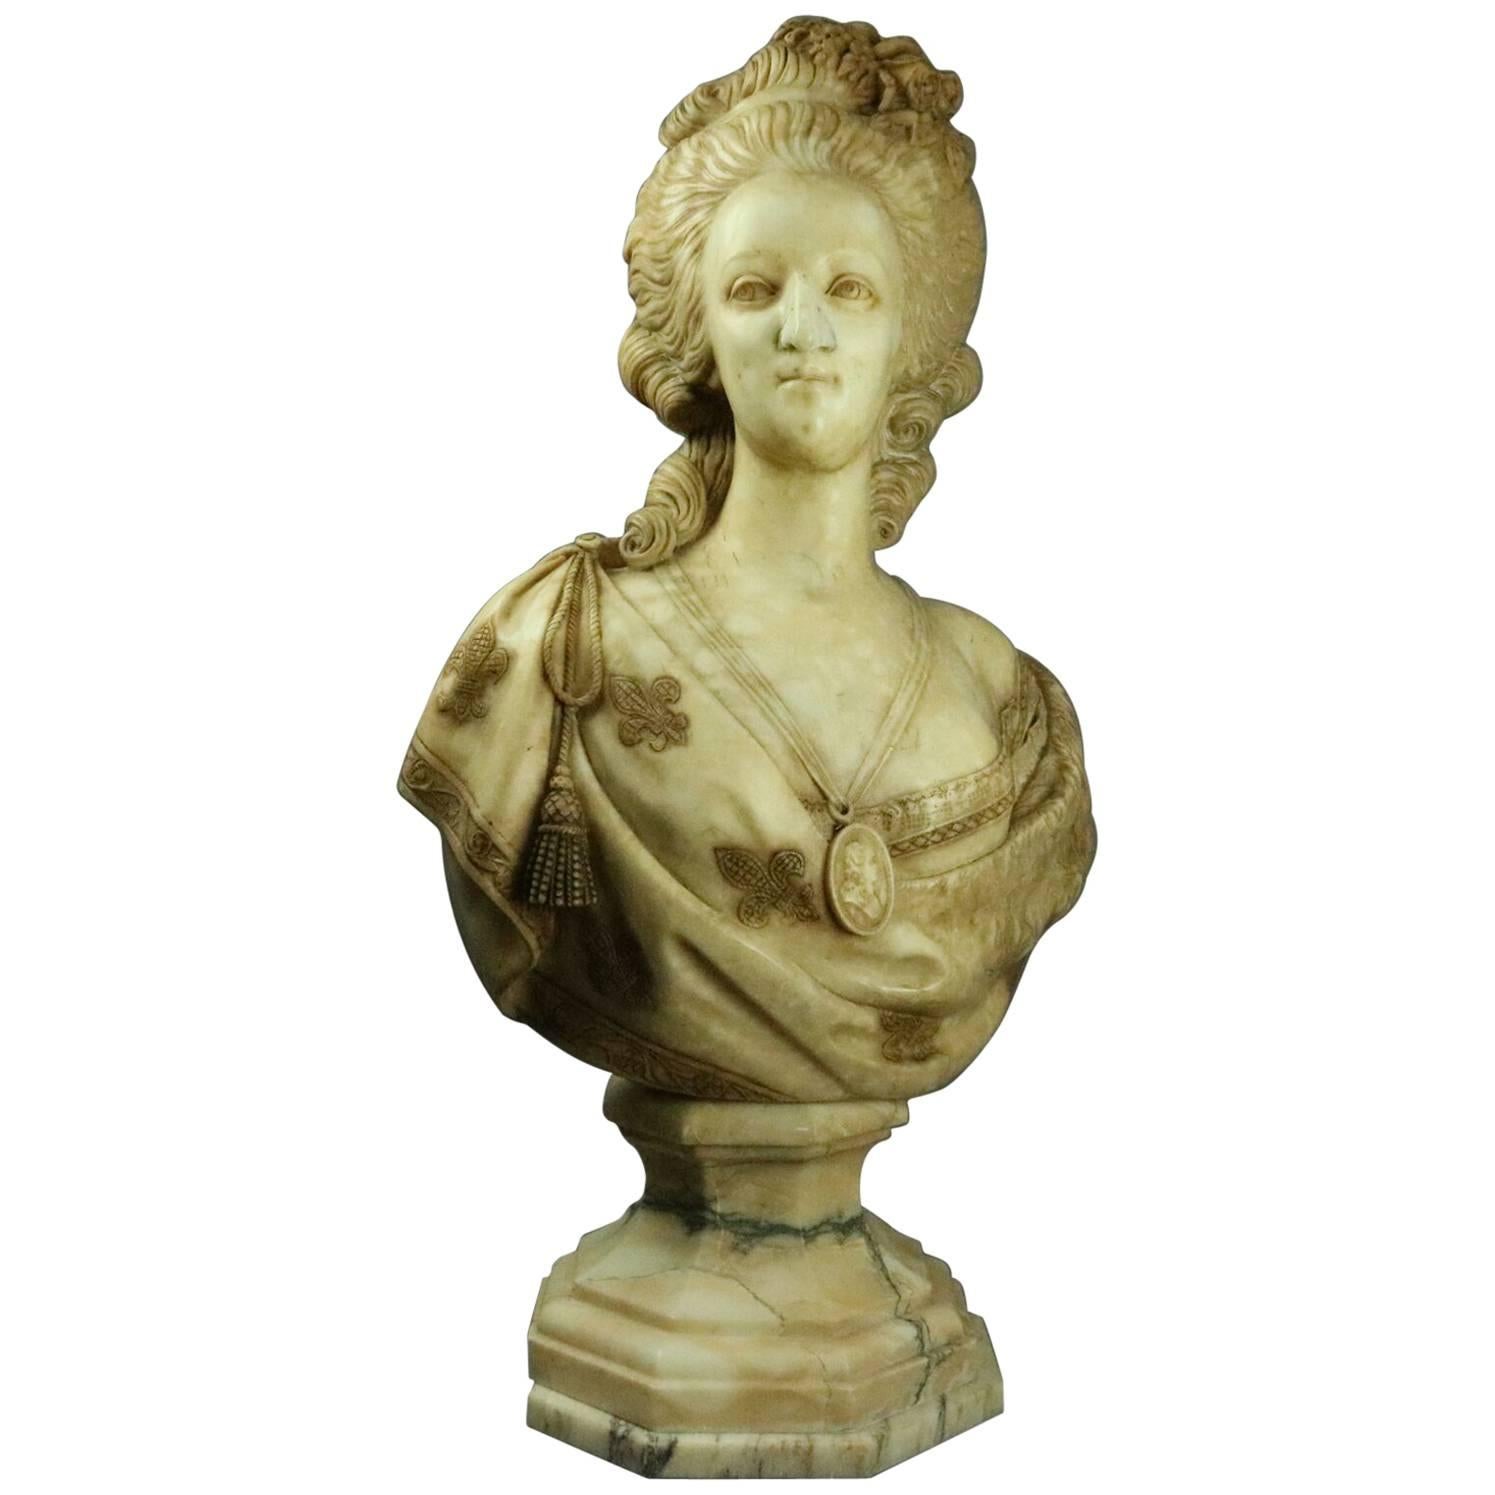 Antique Italian Carved Marble Bust after Houdon of Marie Antoinette, circa 1850